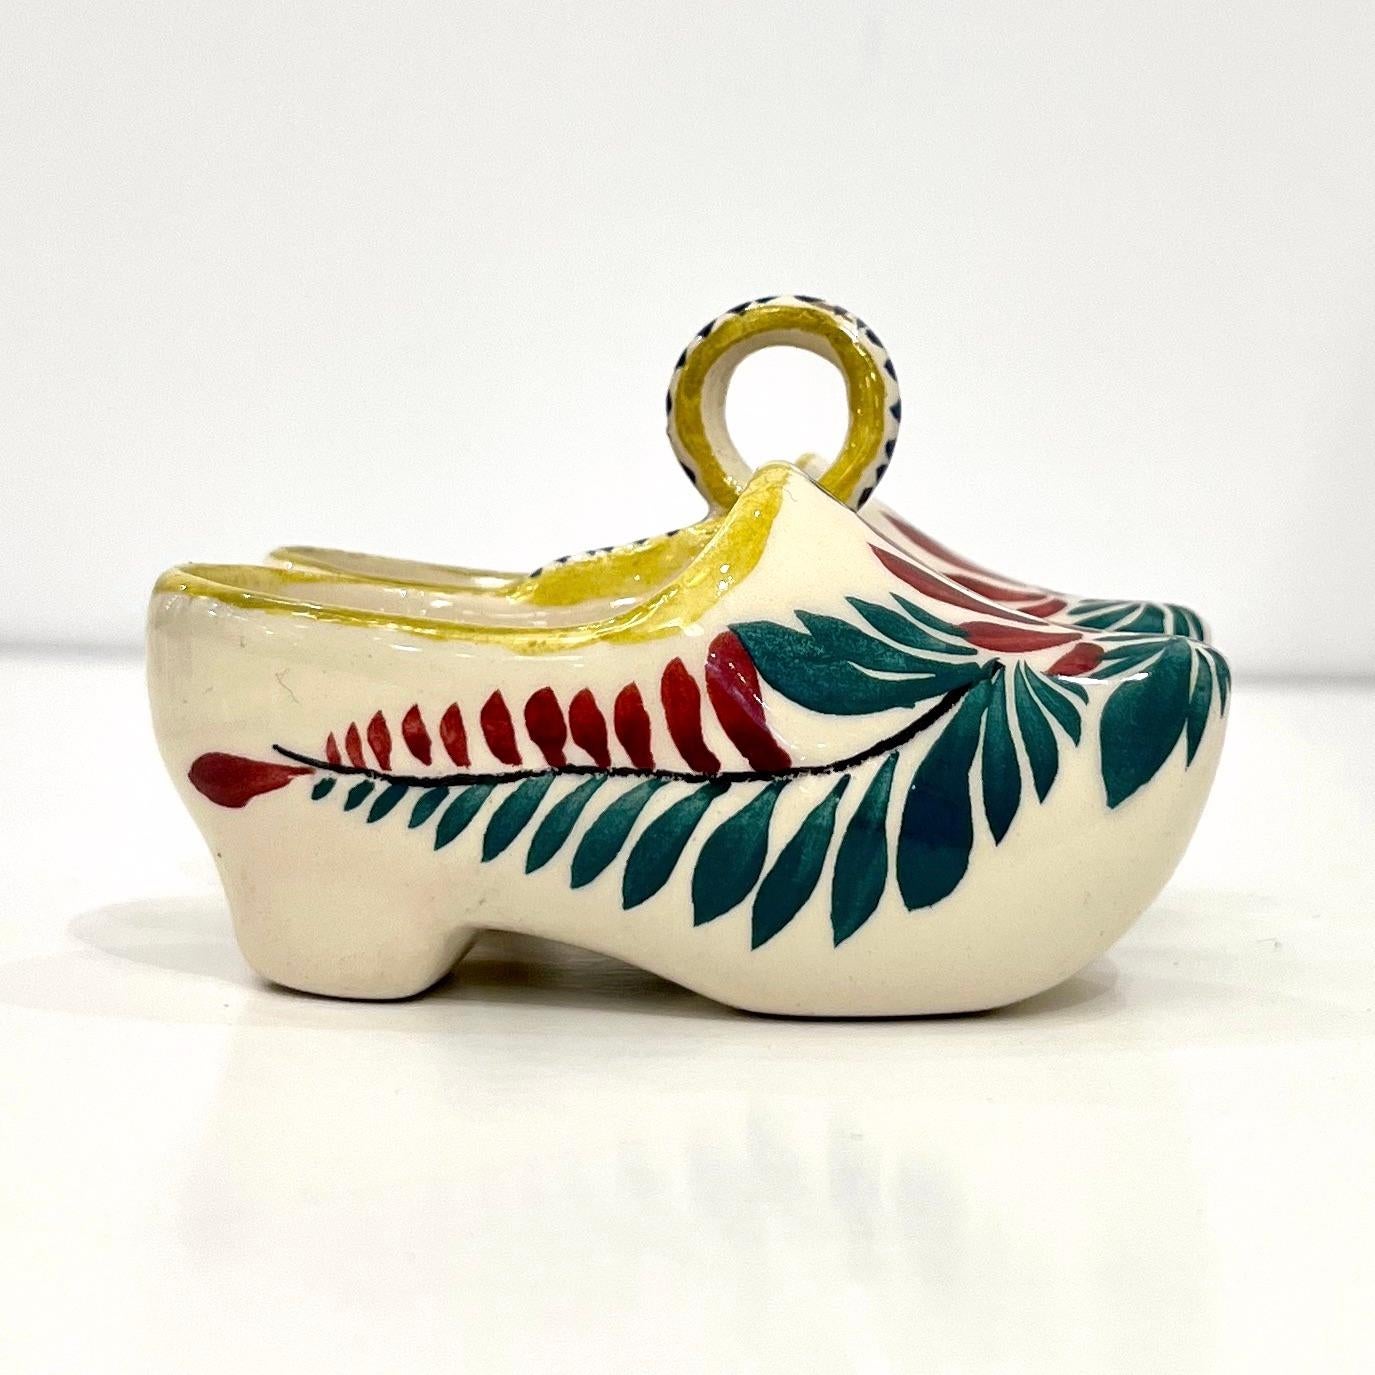 A charming handcrafted decorative salt and pepper holder in the shape of traditional Breton sabot clogs, mid-20th century French pottery majolica, in extremely good condition, signed HB Caen known for this distinctive faience pottery, characterized